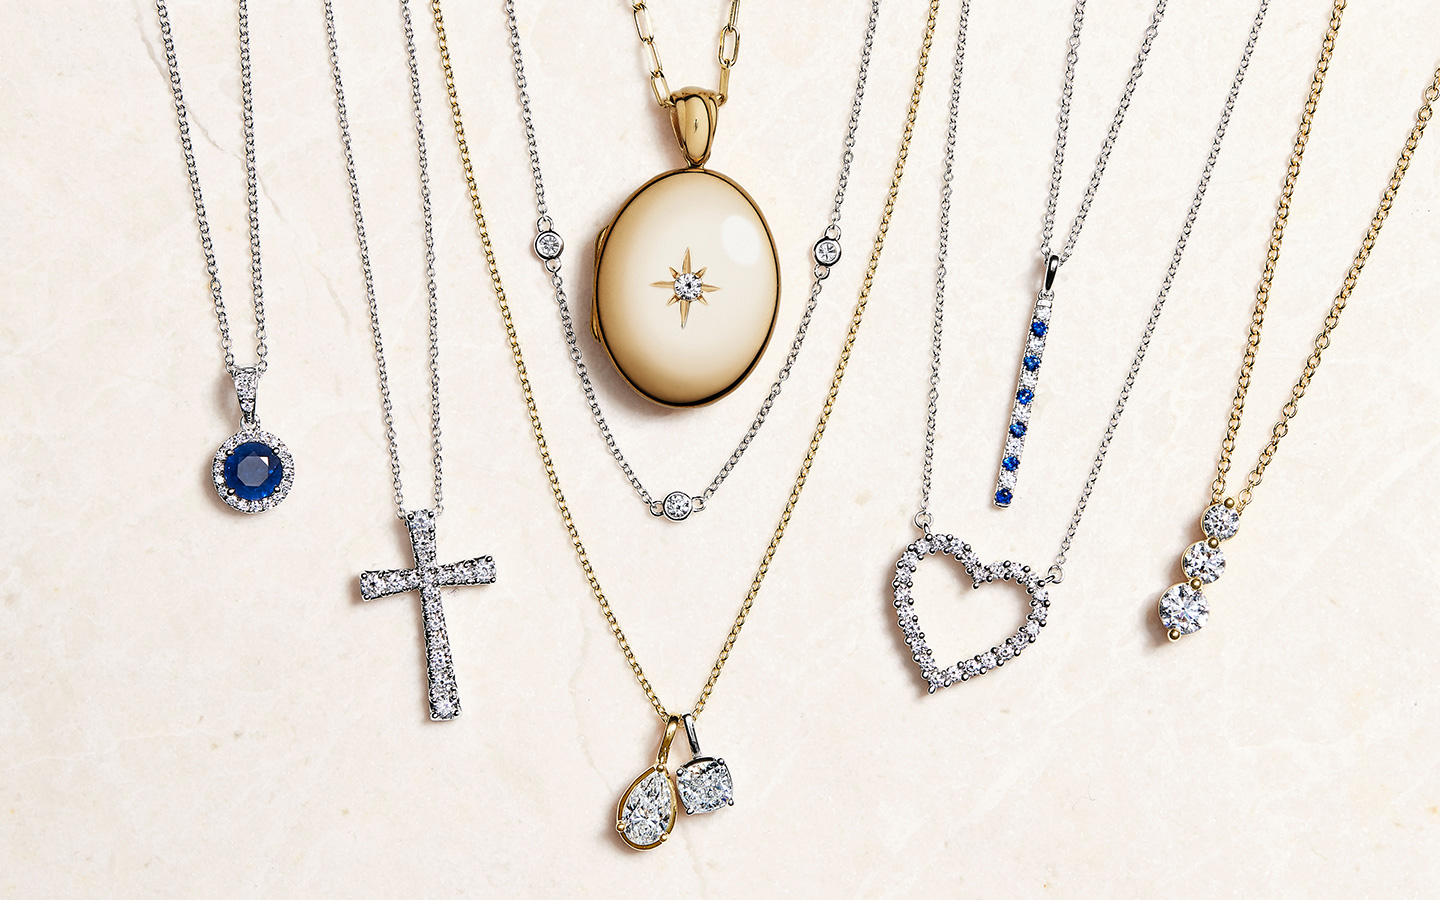 Blue Nile necklaces including gemstone and diamond necklaces in yellow and white gold. 